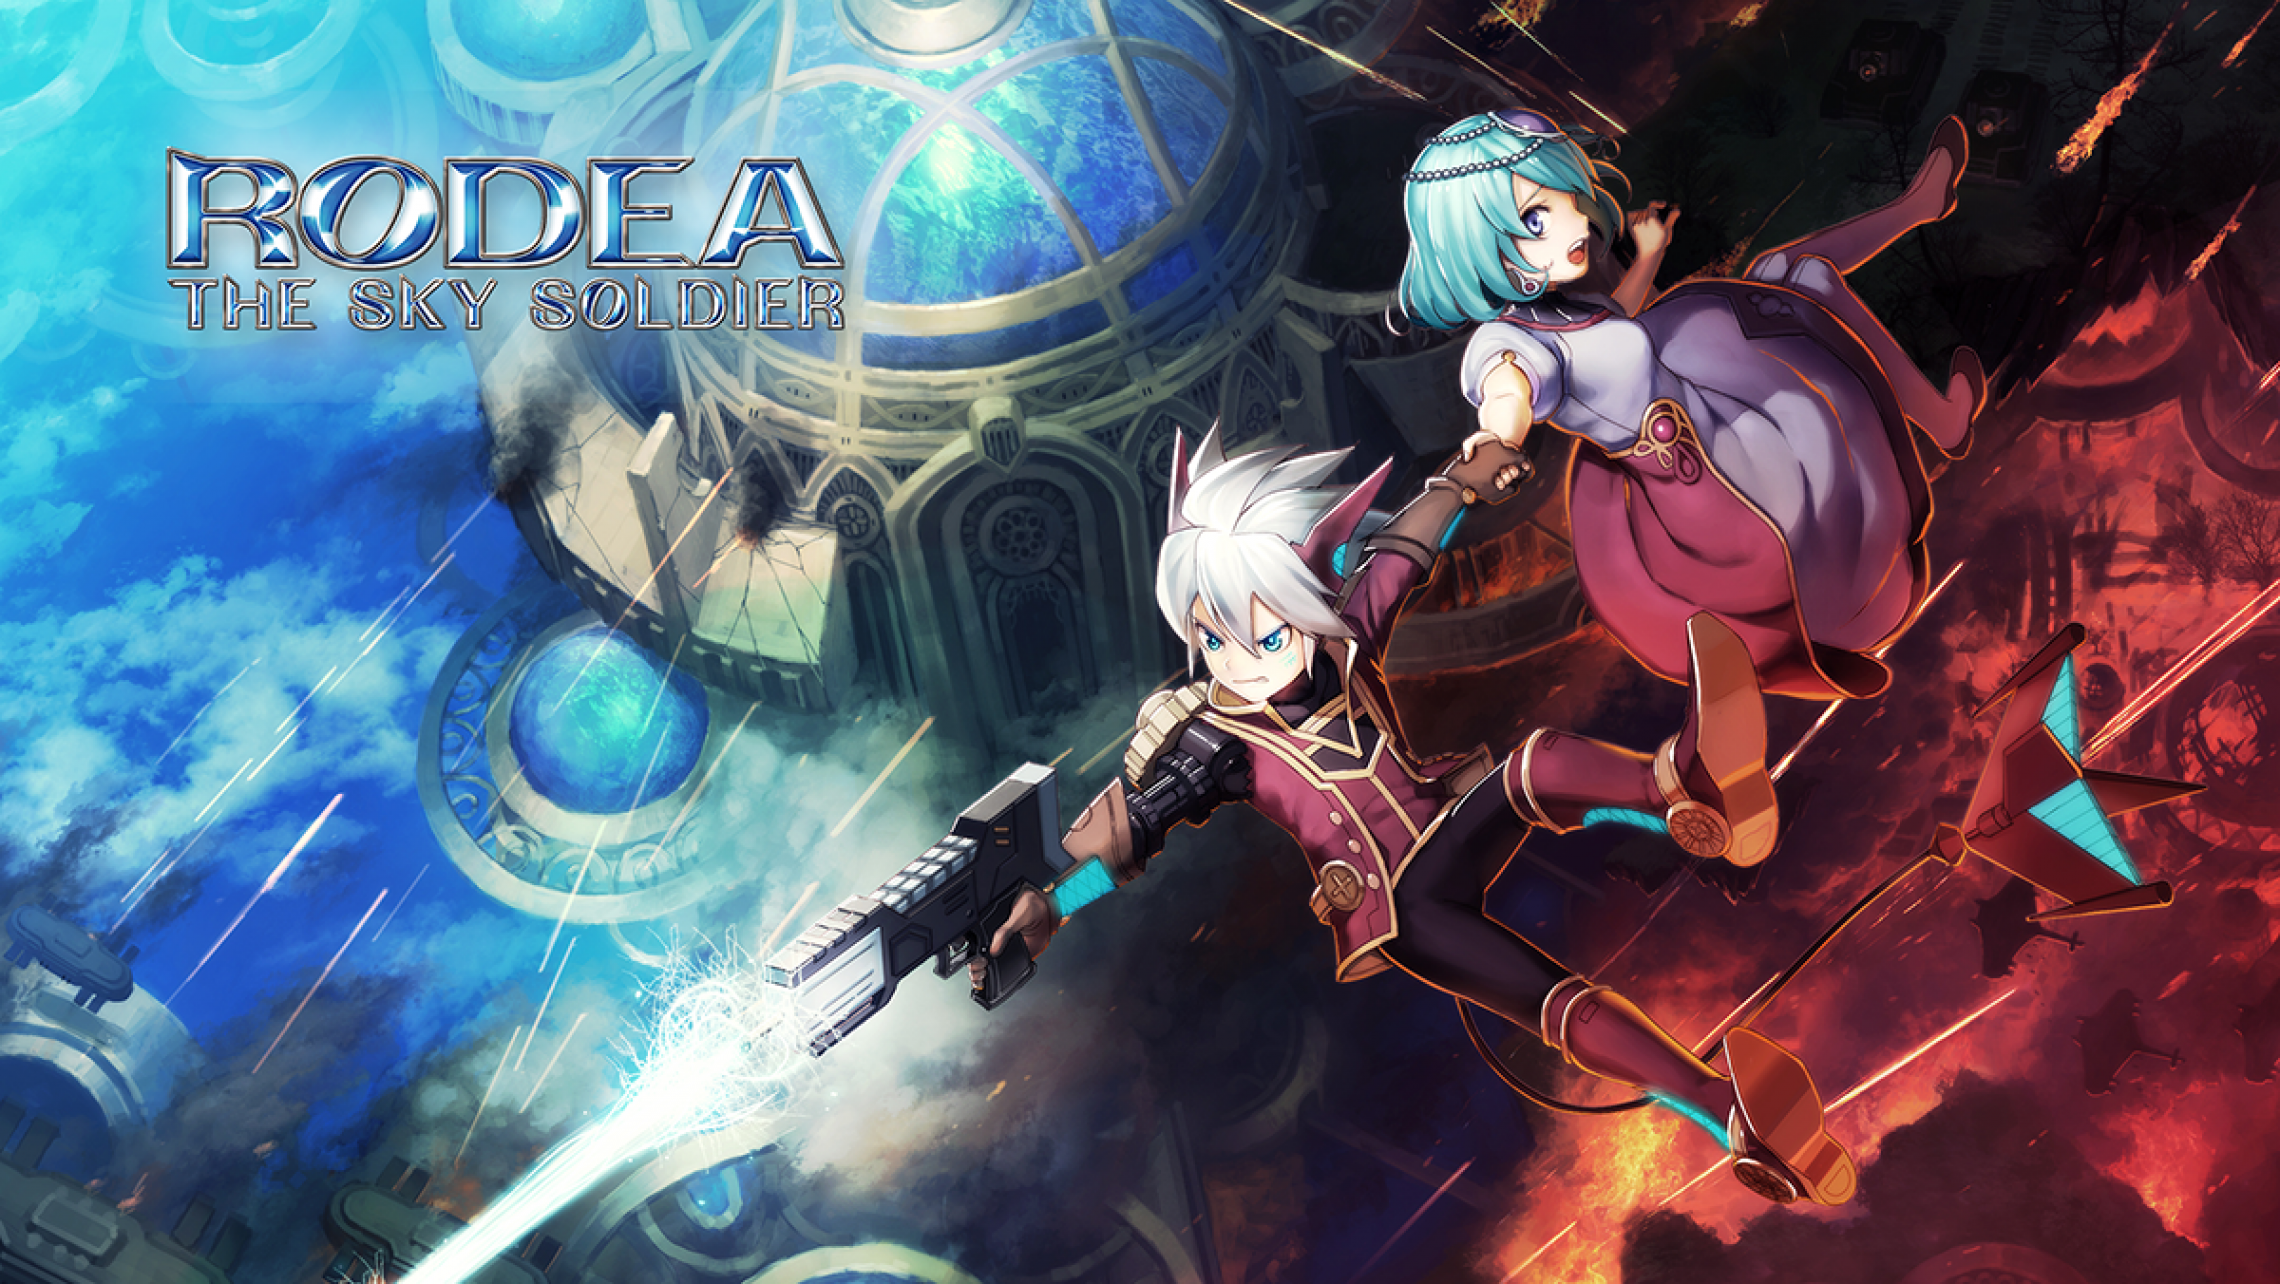 rodea the sky soldier switch